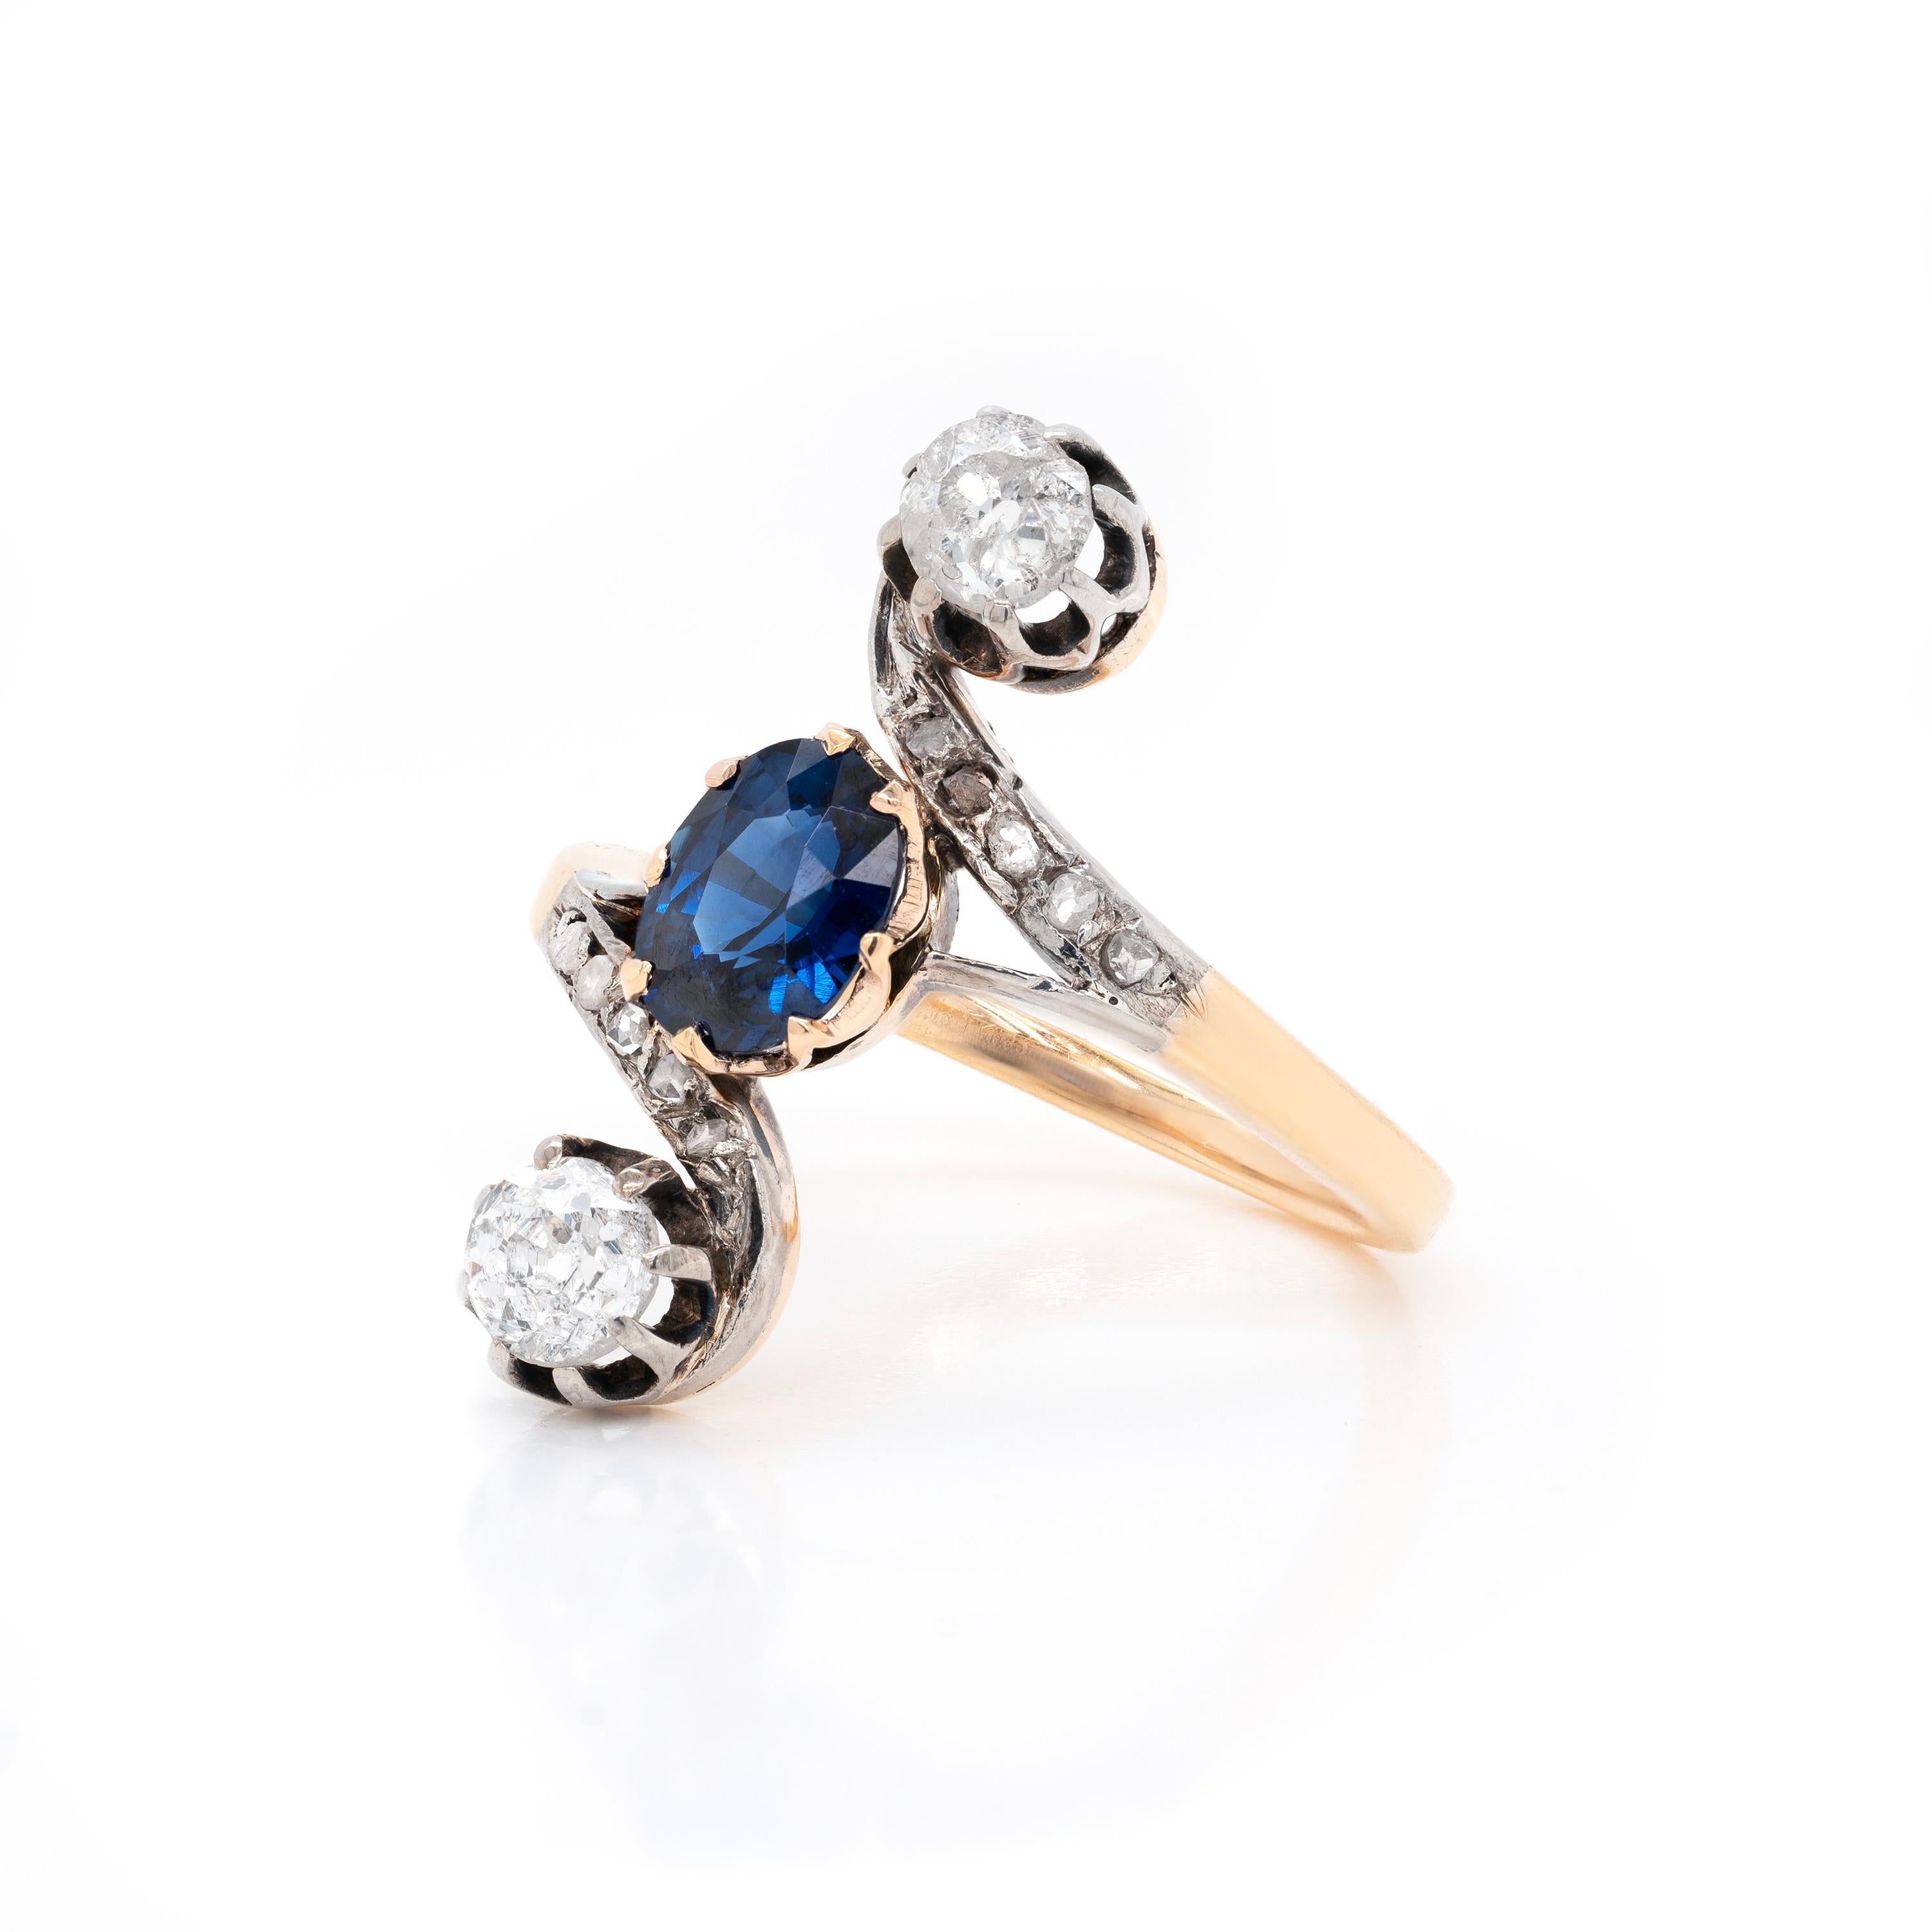 Late Victorian vertical three stone ring set with an oval blue sapphire weighing 1.04ct in an eight claw open back gold setting. The sapphire is beautifully accompanied by two old cut diamonds weighing approximately 0.25ct each, both in eight claw